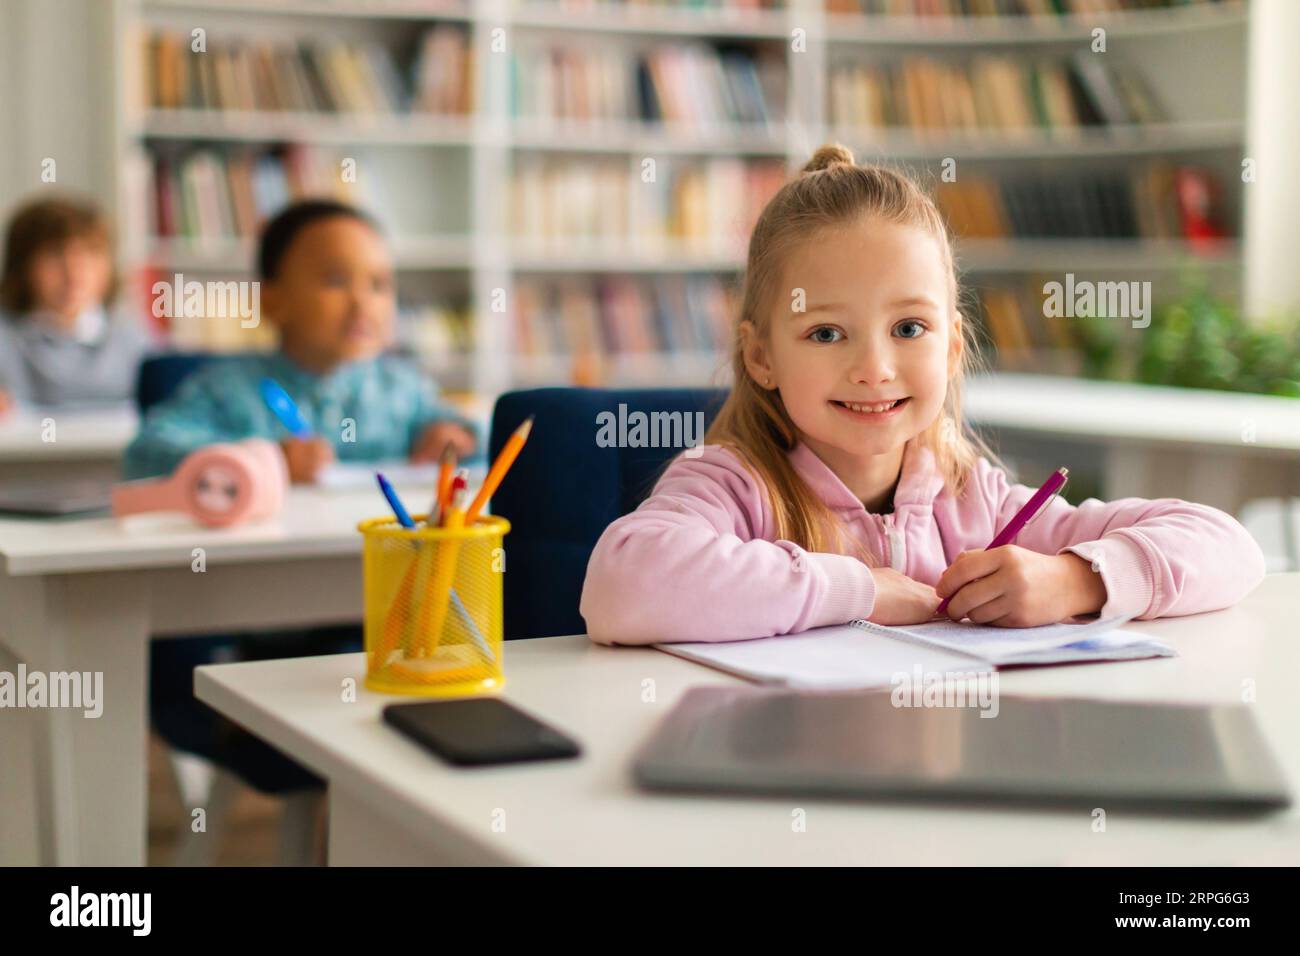 Happy european school girl smiling at camera, sitting at desk in classroom with classmates on background Stock Photo